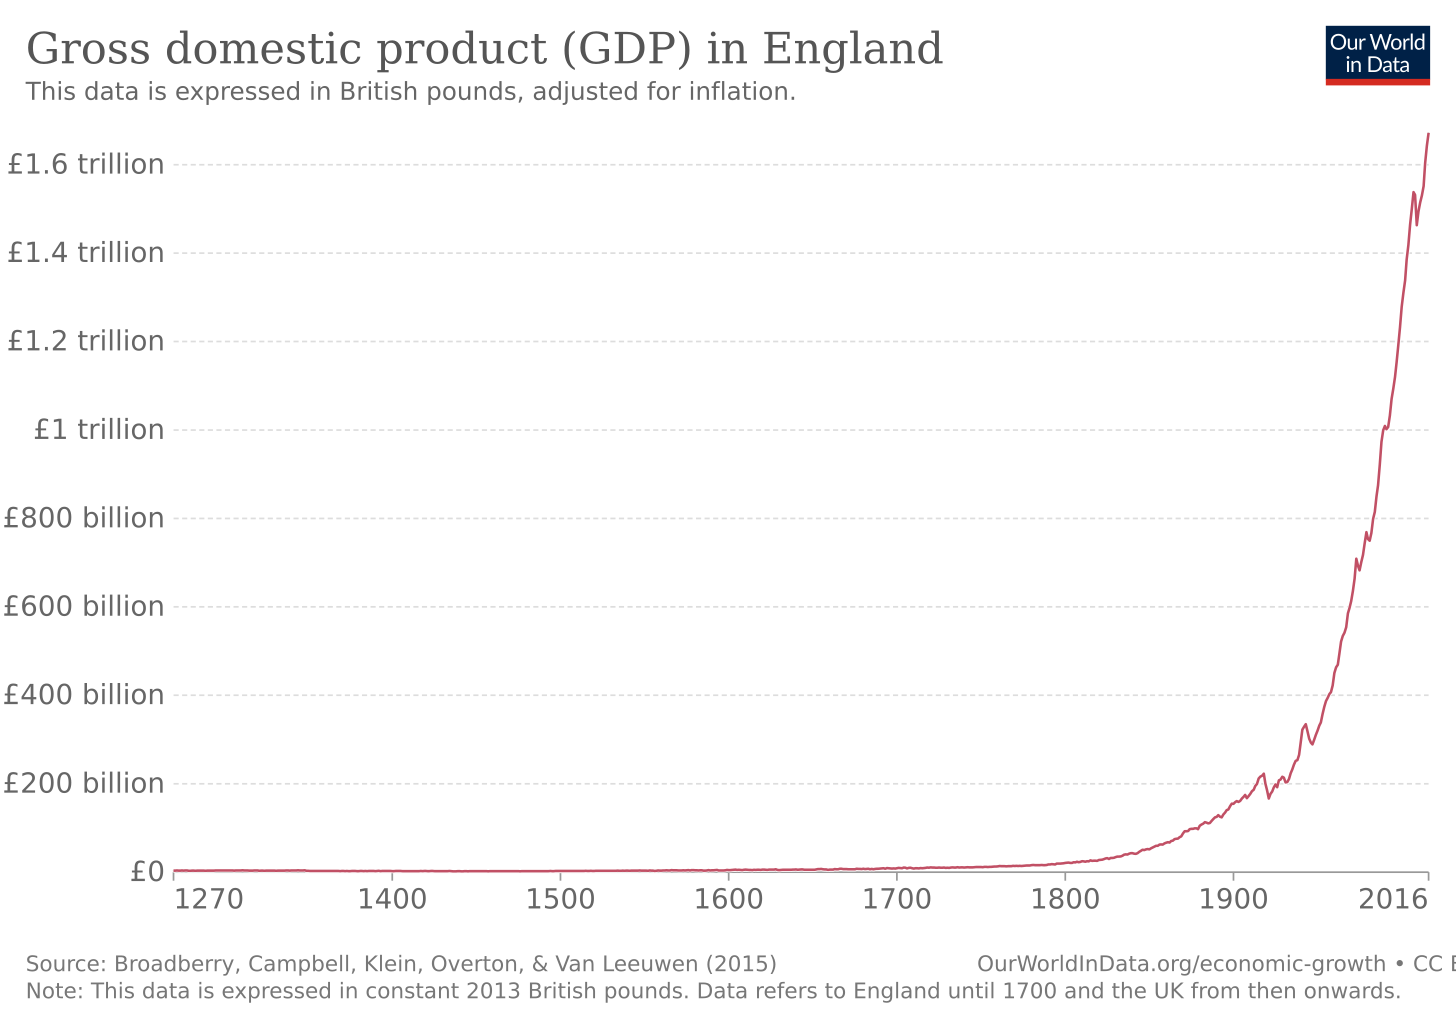 Gross domestic product (GDP) in England